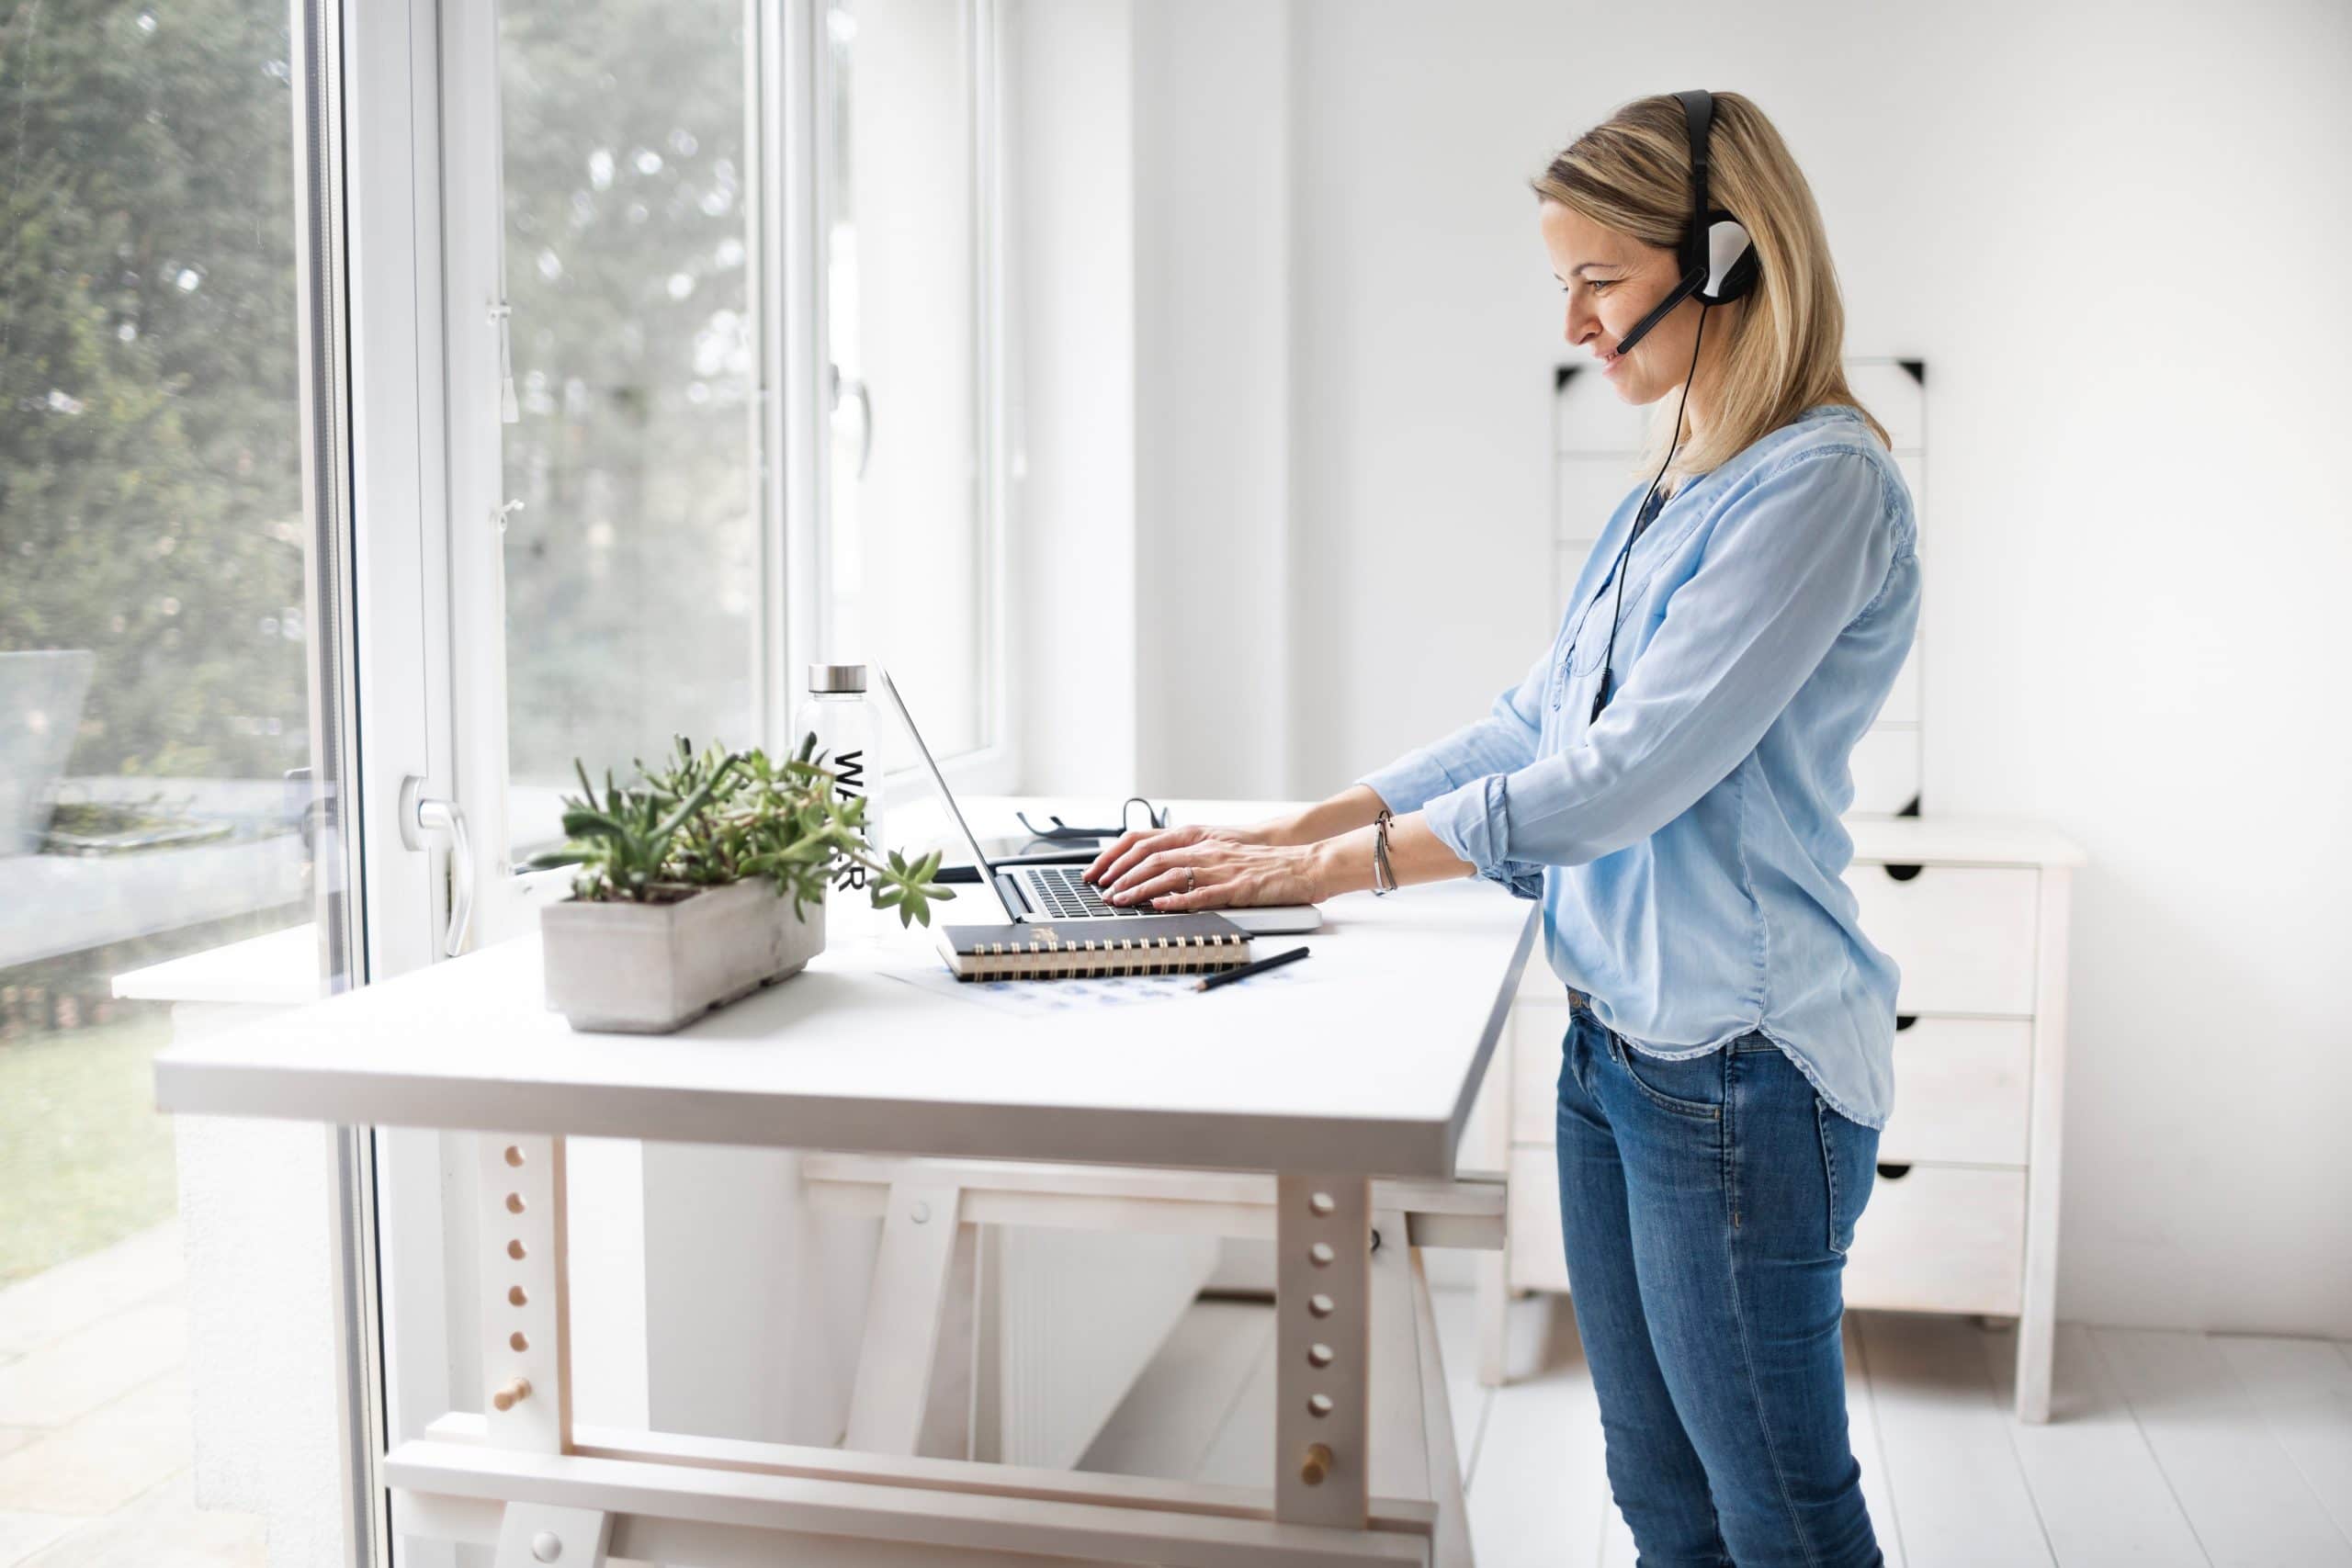 Essential Equipment to Set Up an Ergonomic Home Office Correctly